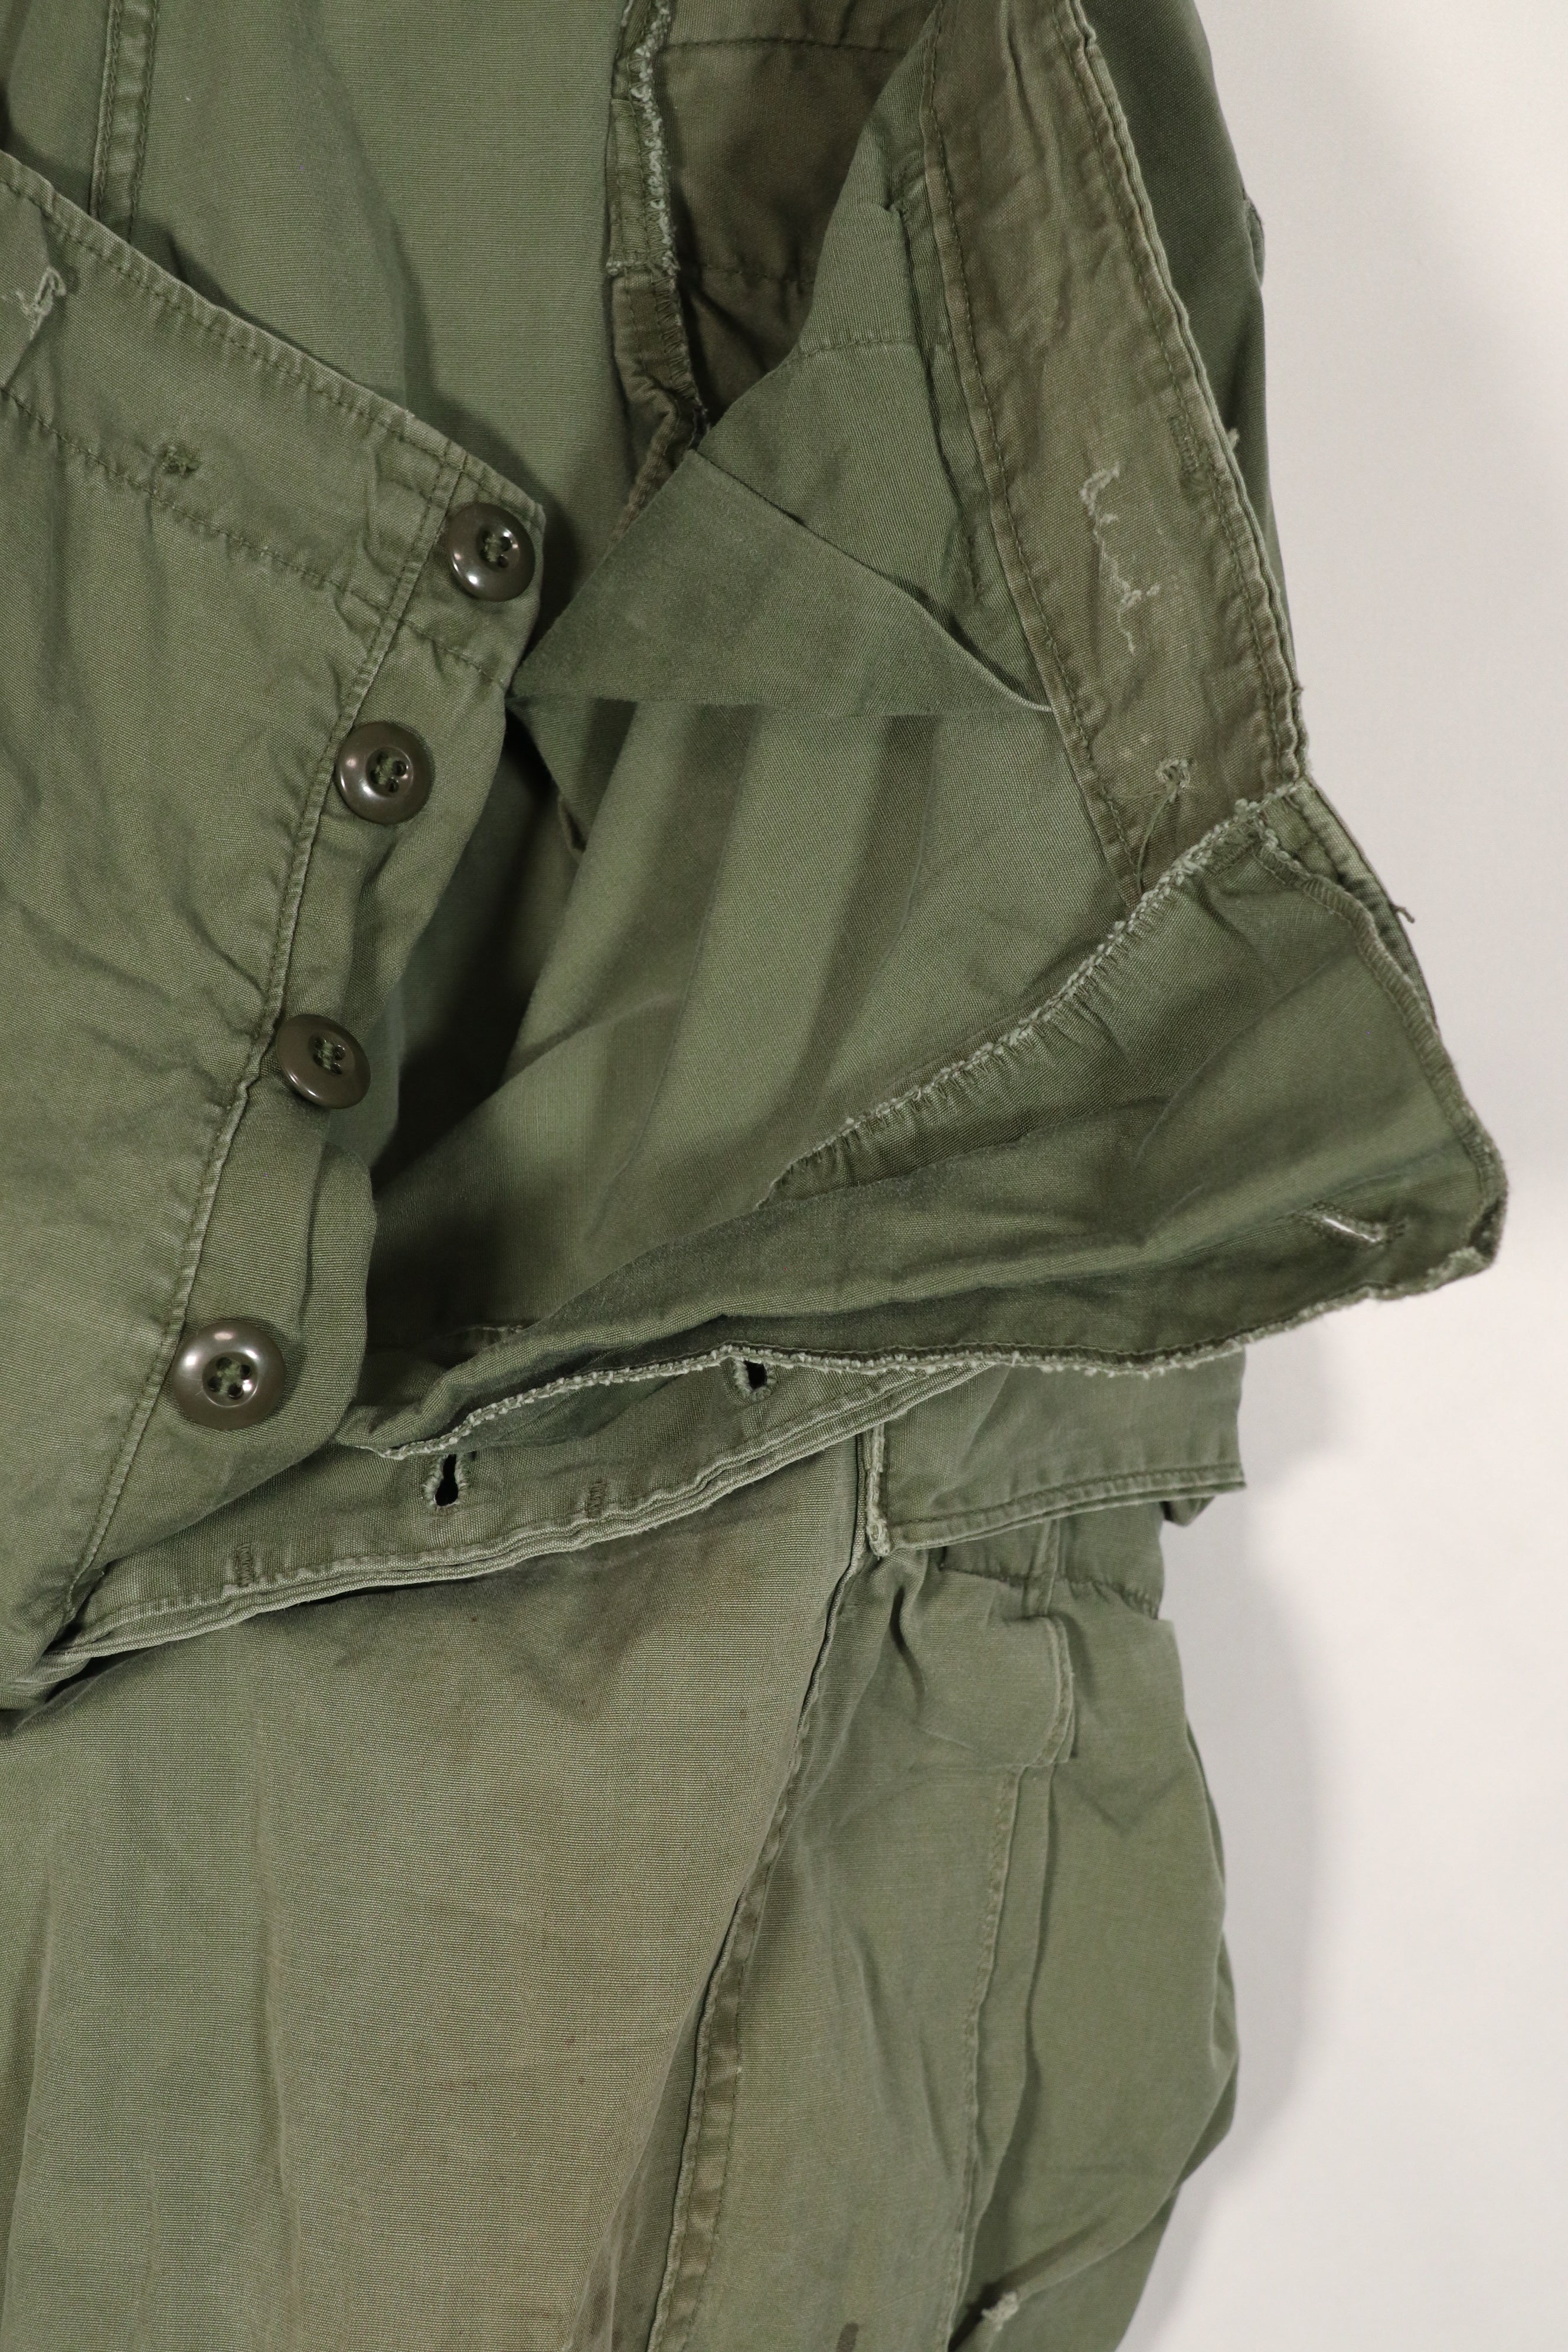 Real 2nd Model Jungle Fatigue Pants with leg ties, large size, stained, used.